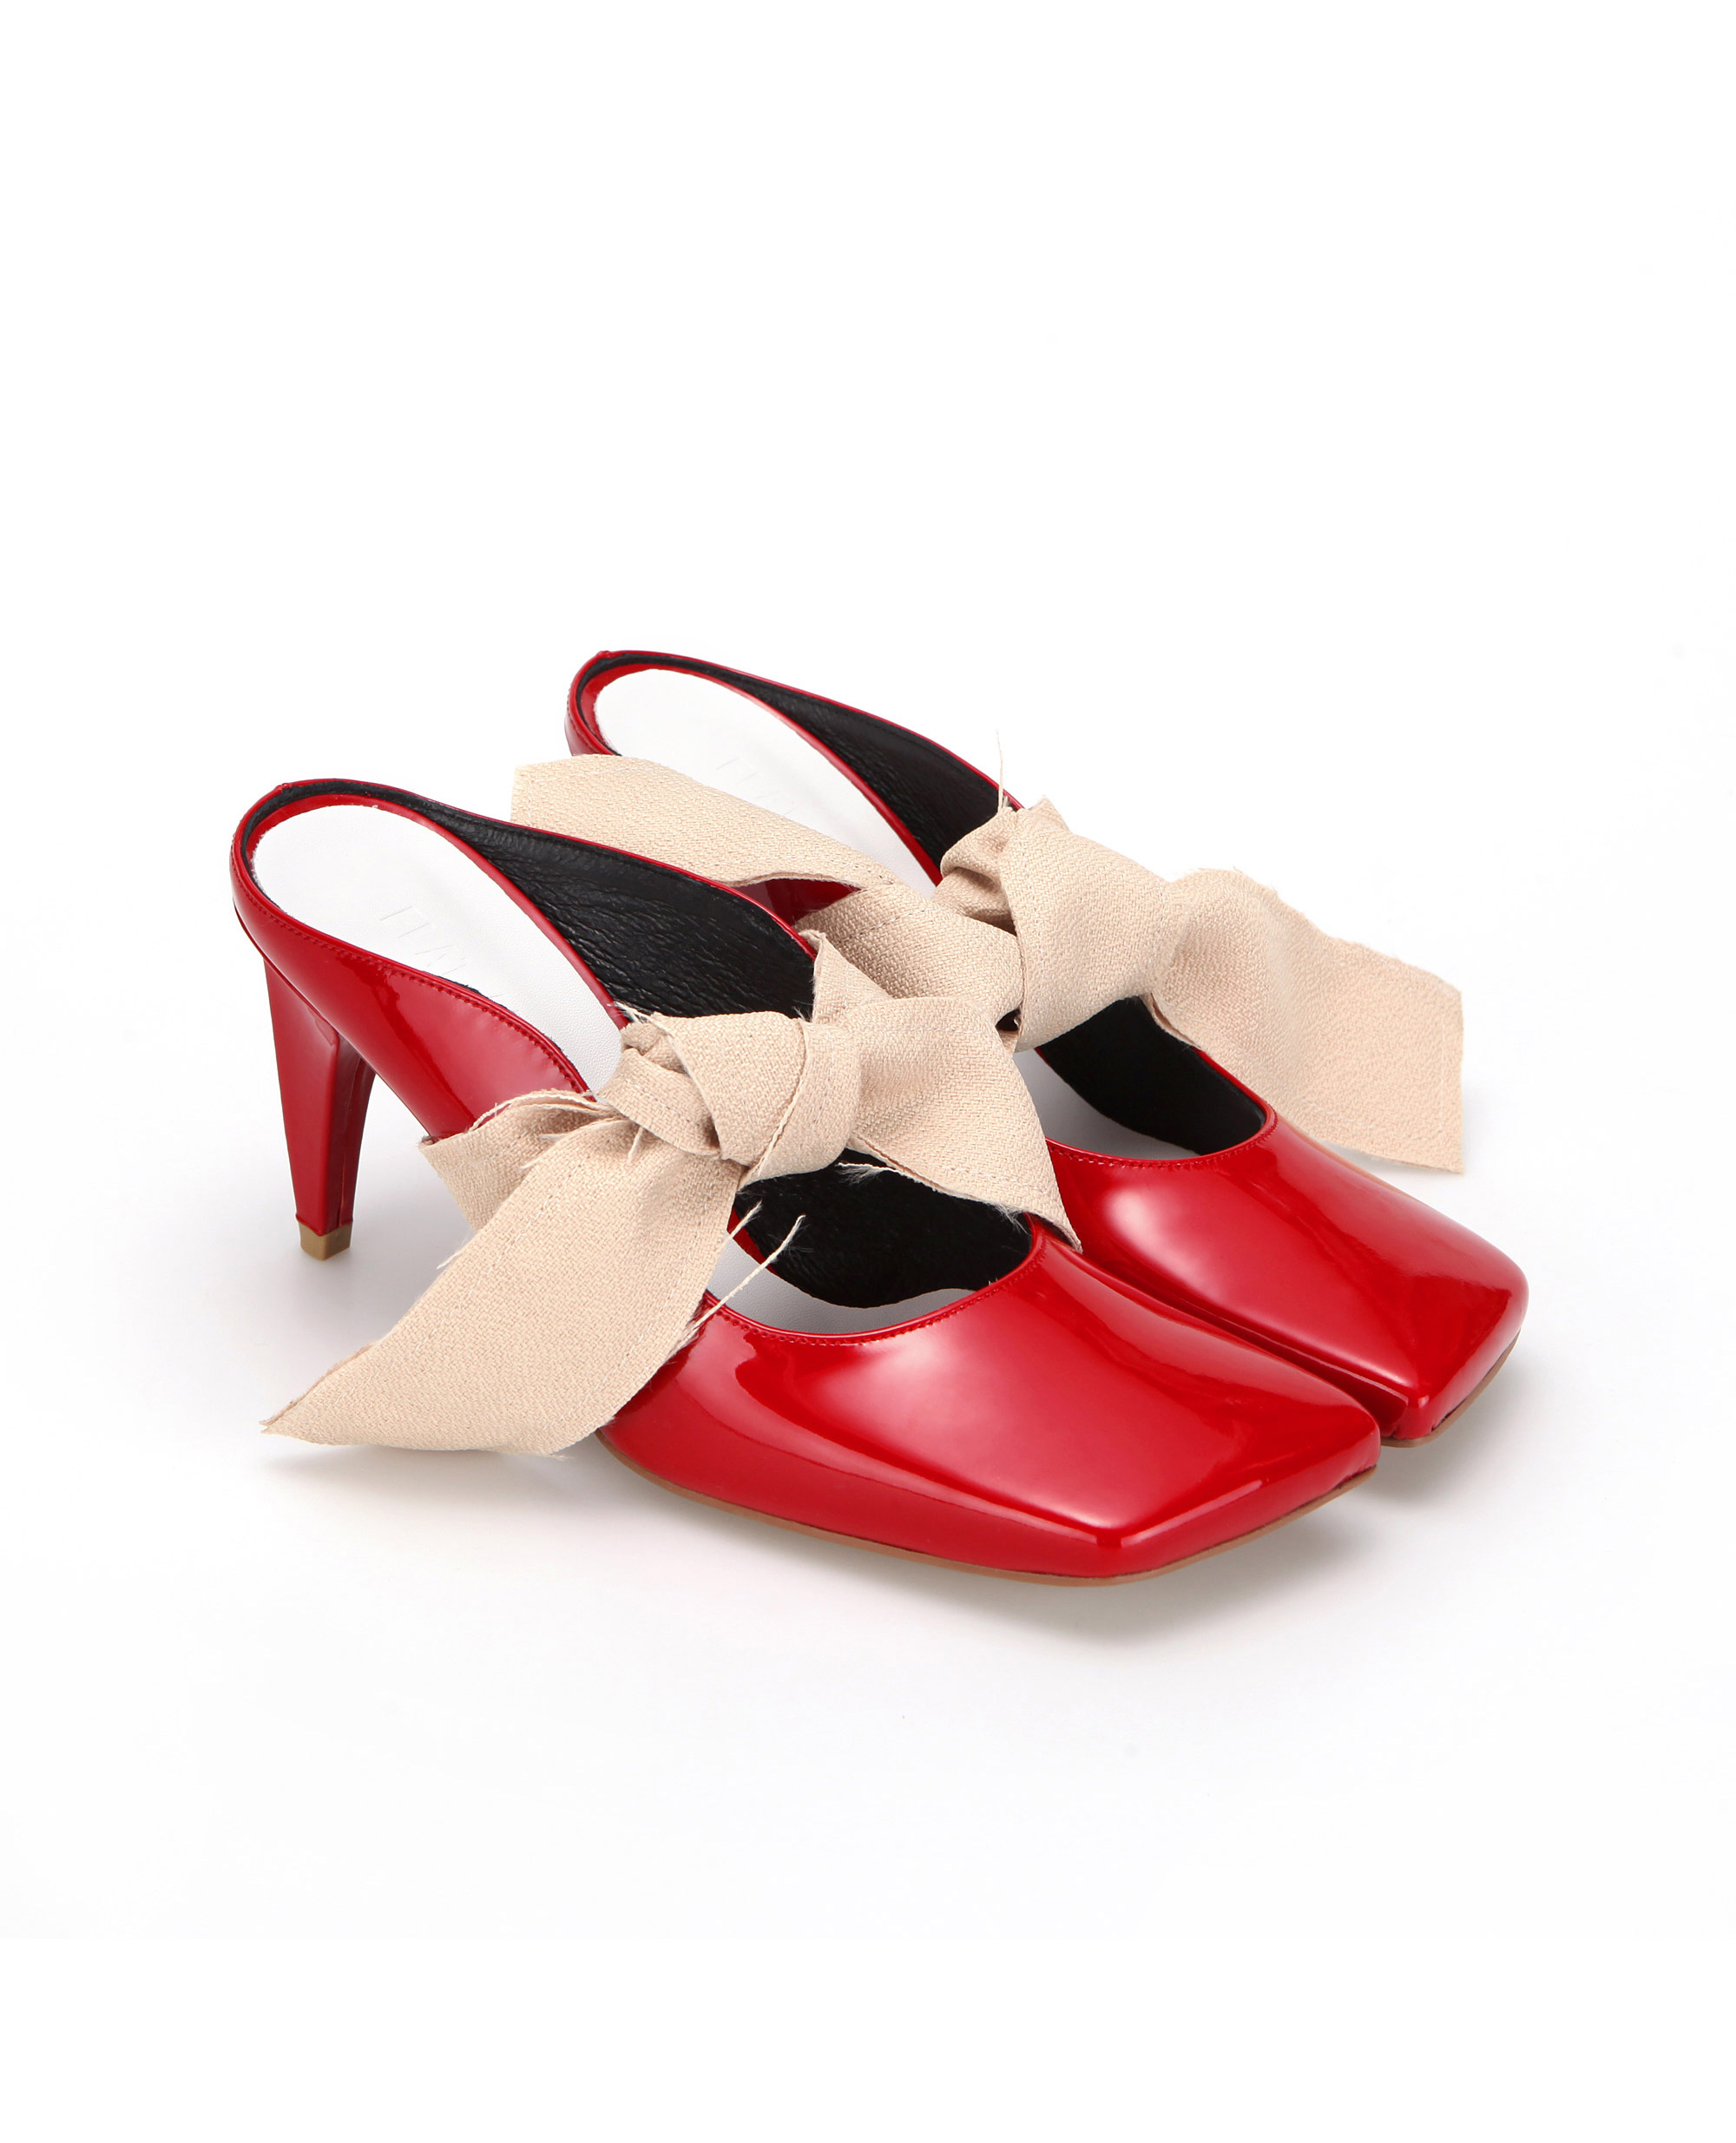 Squared toe mule with removable front ties | Glossy red